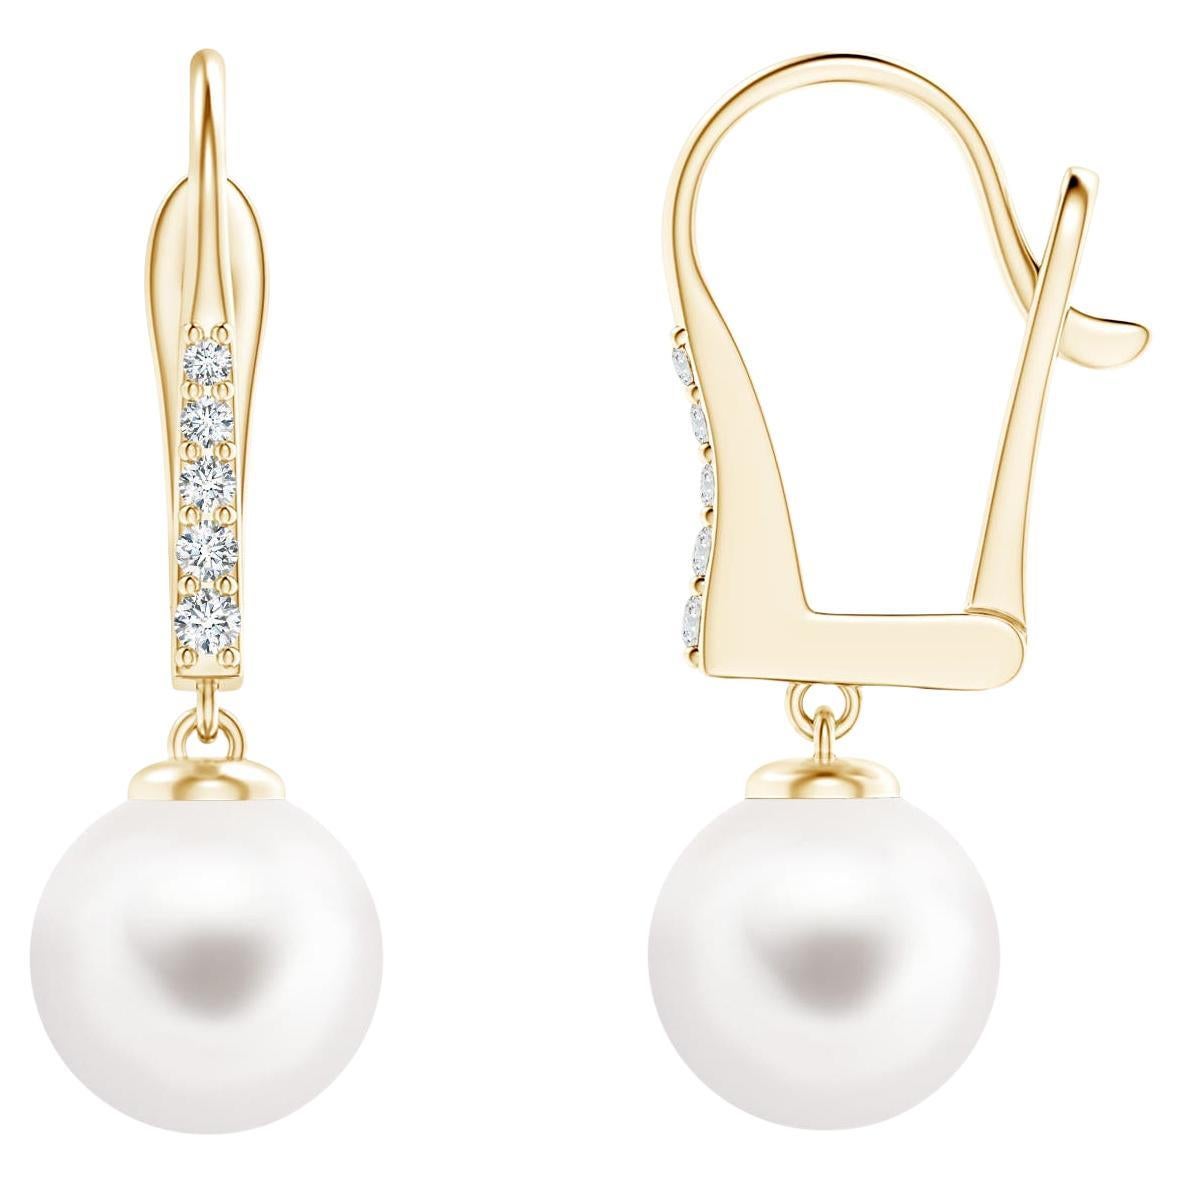 Freshwater Cultured Pearl and Diamond Earrings in 14K Yellow Gold